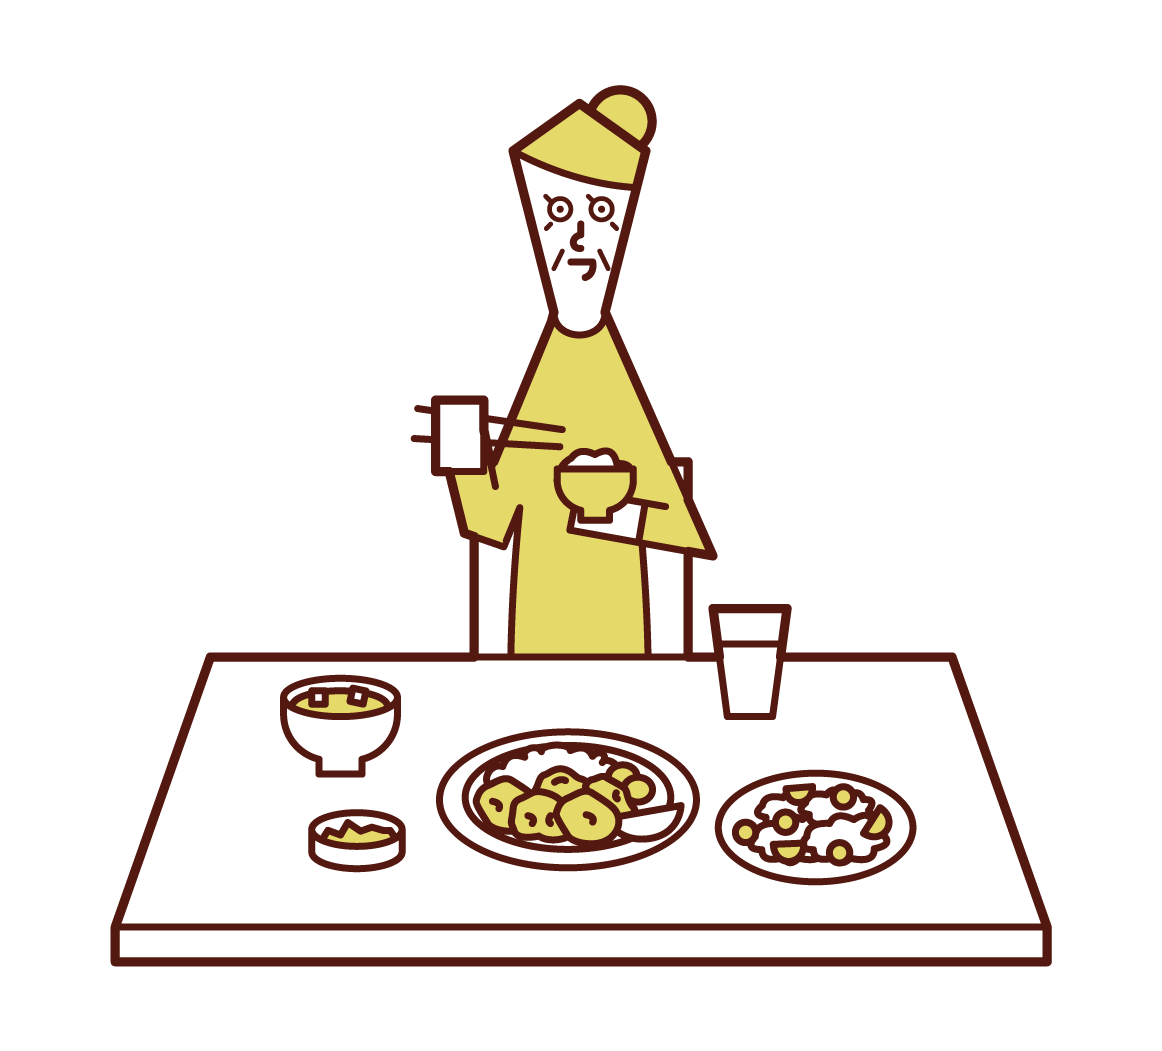 Illustration of an old man (woman) eating a meal